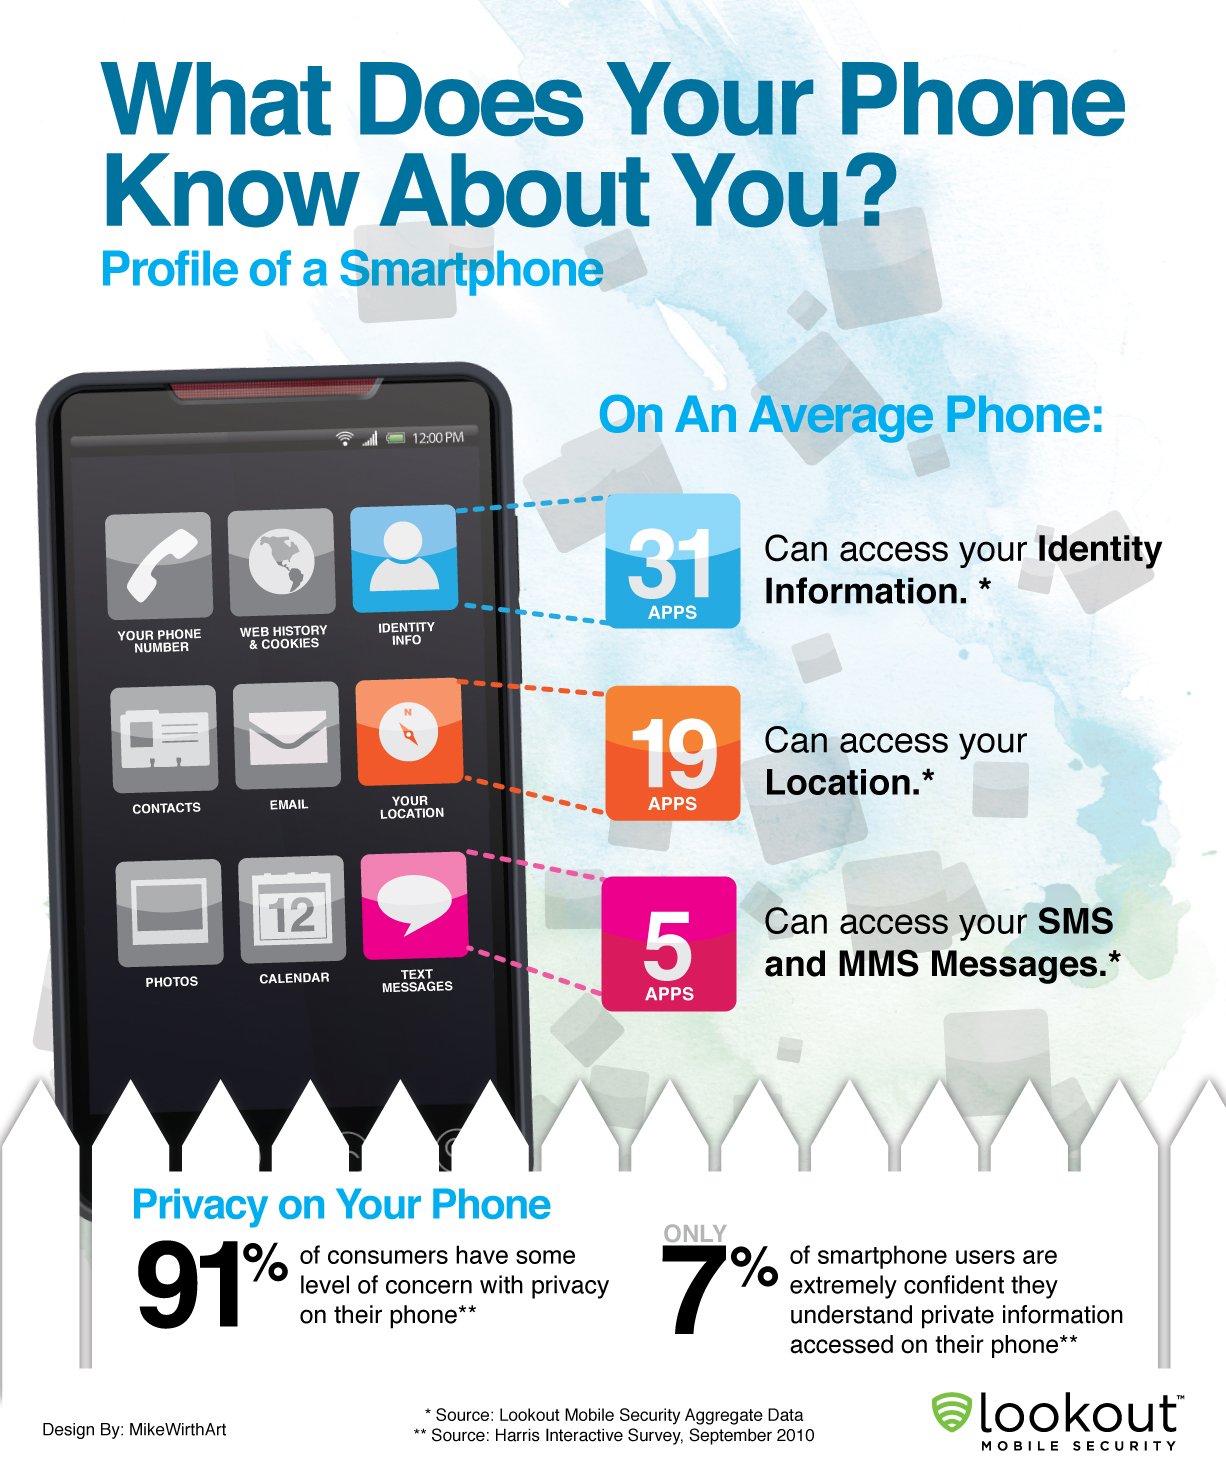 Are You Concerned About Smartphone Security?